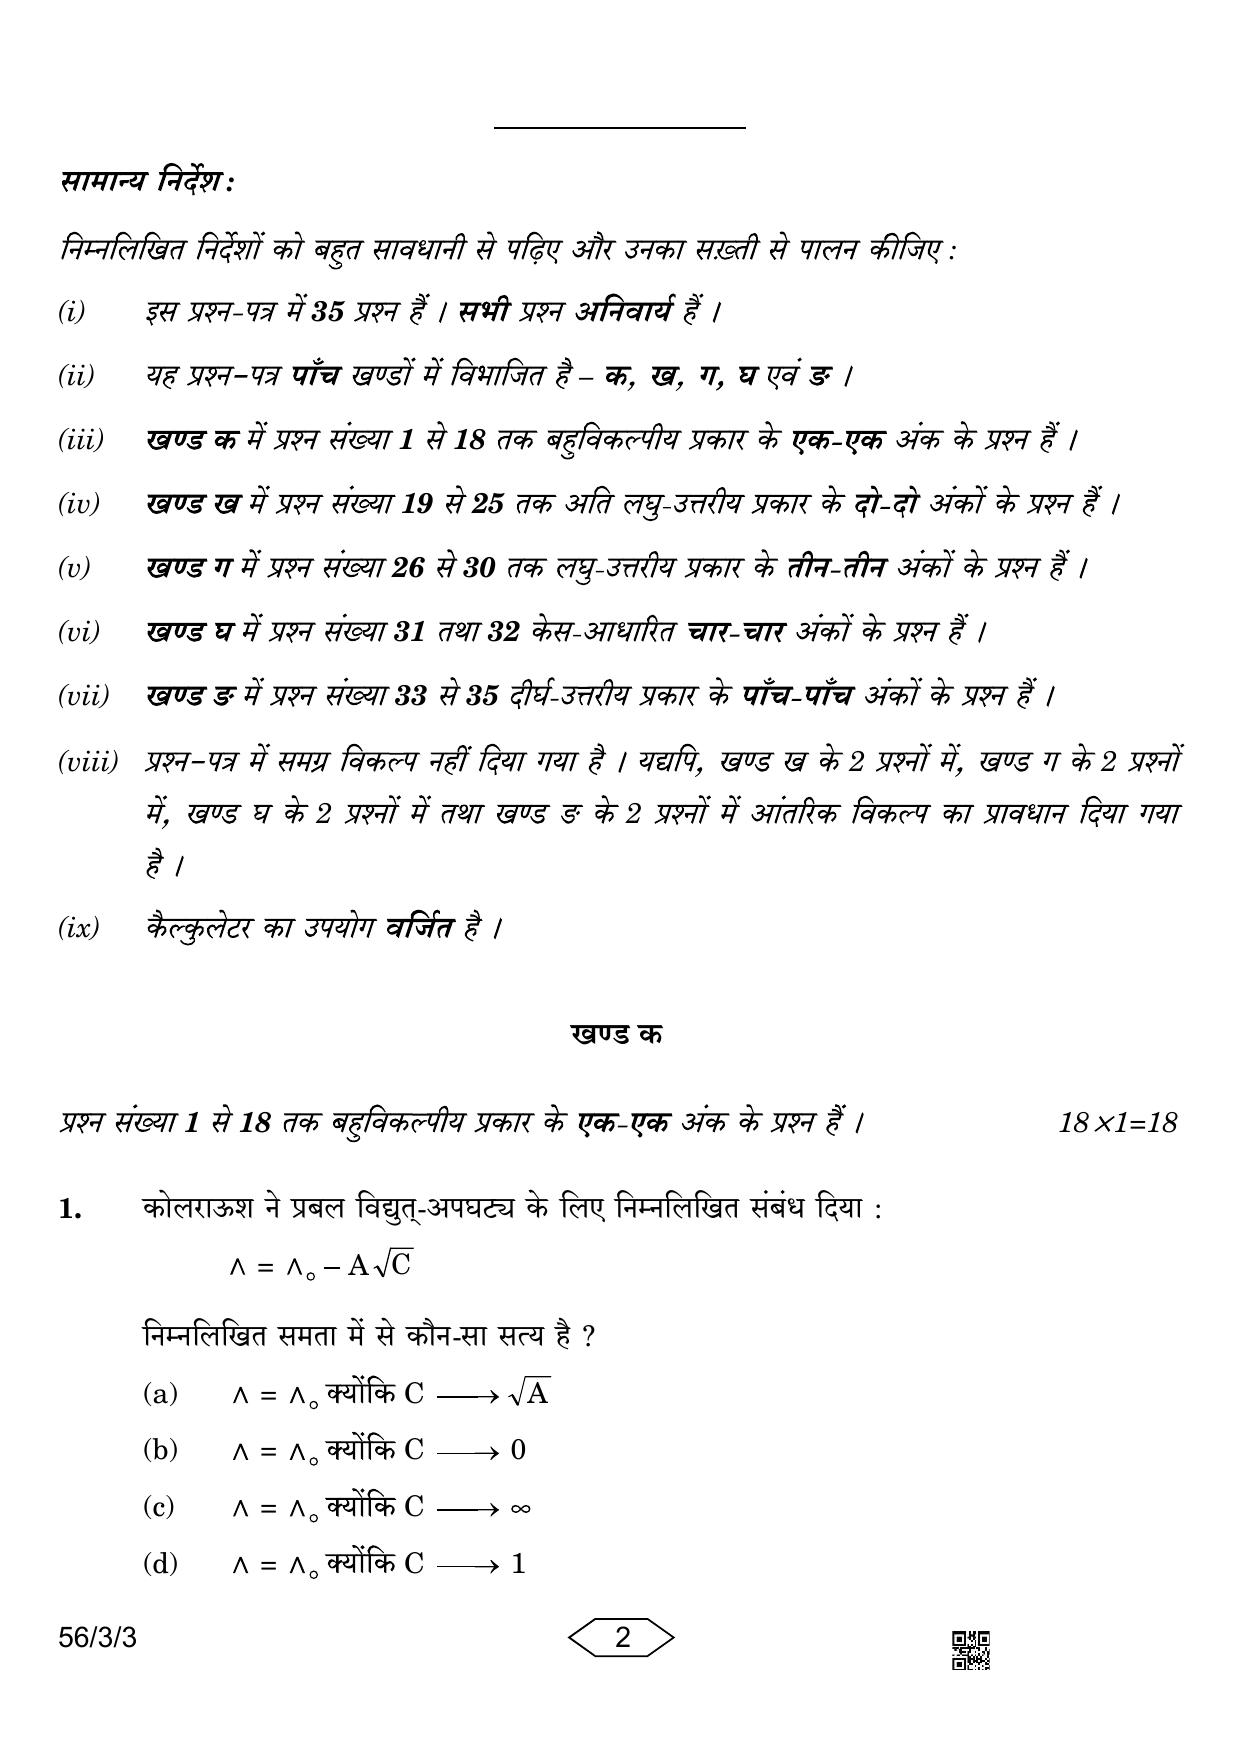 CBSE Class 12 56-3-3 Chemistry 2023 Question Paper - Page 2